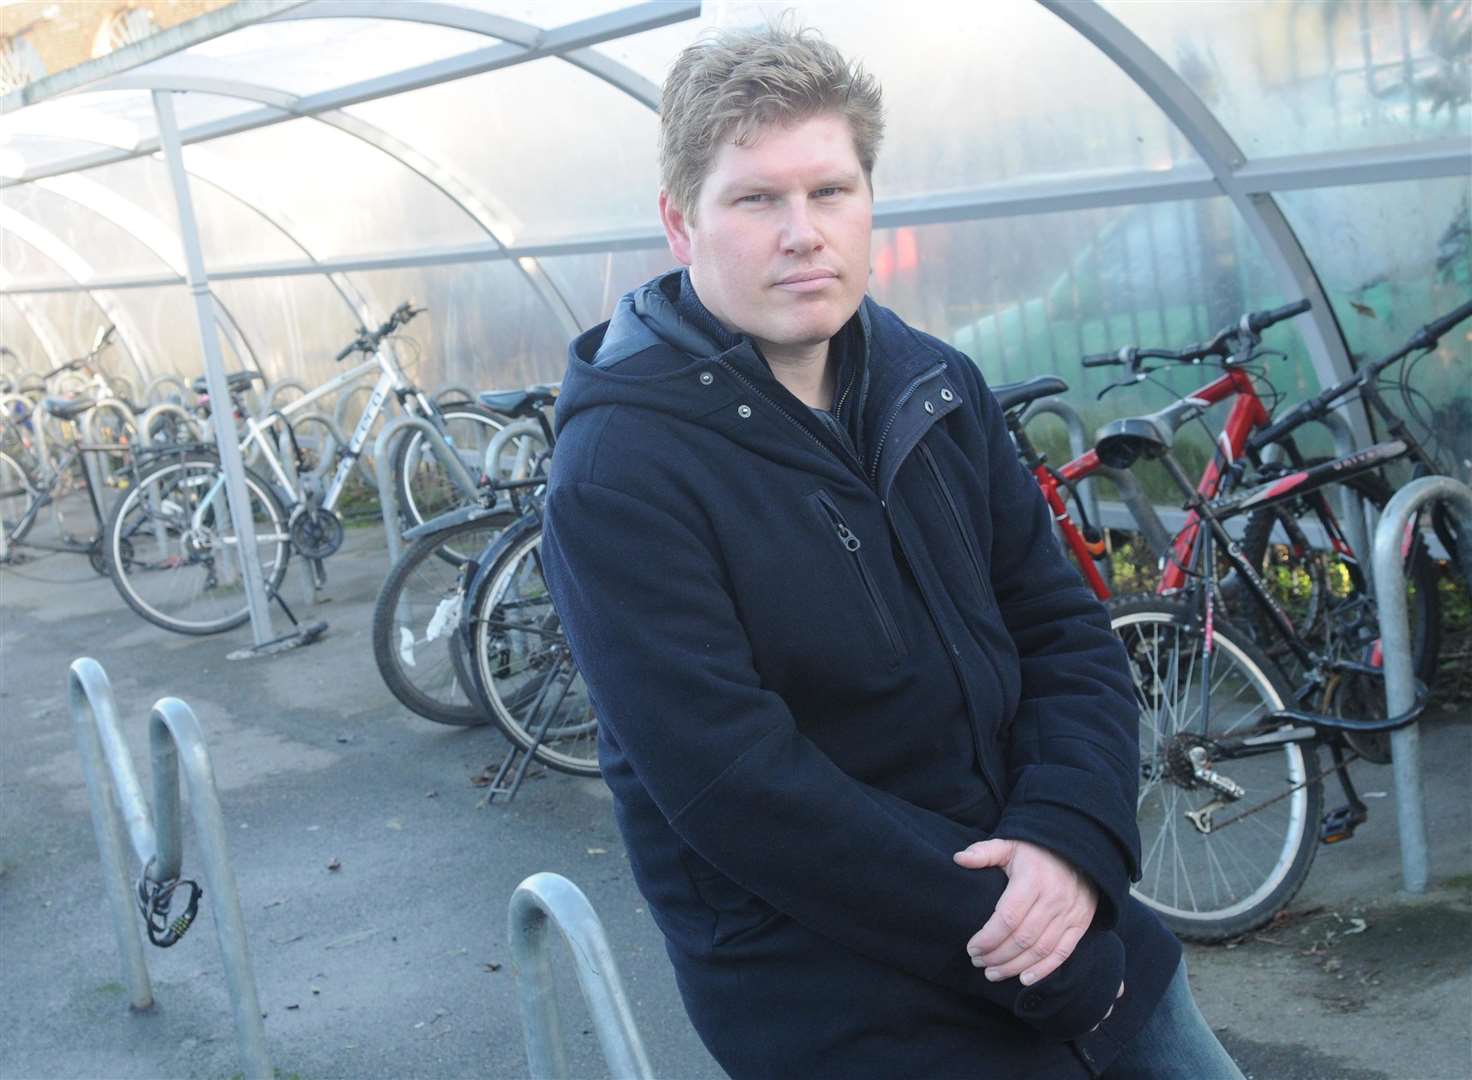 James Alexandre is calling for improved security at Canterbury West after having his bicycle stolen